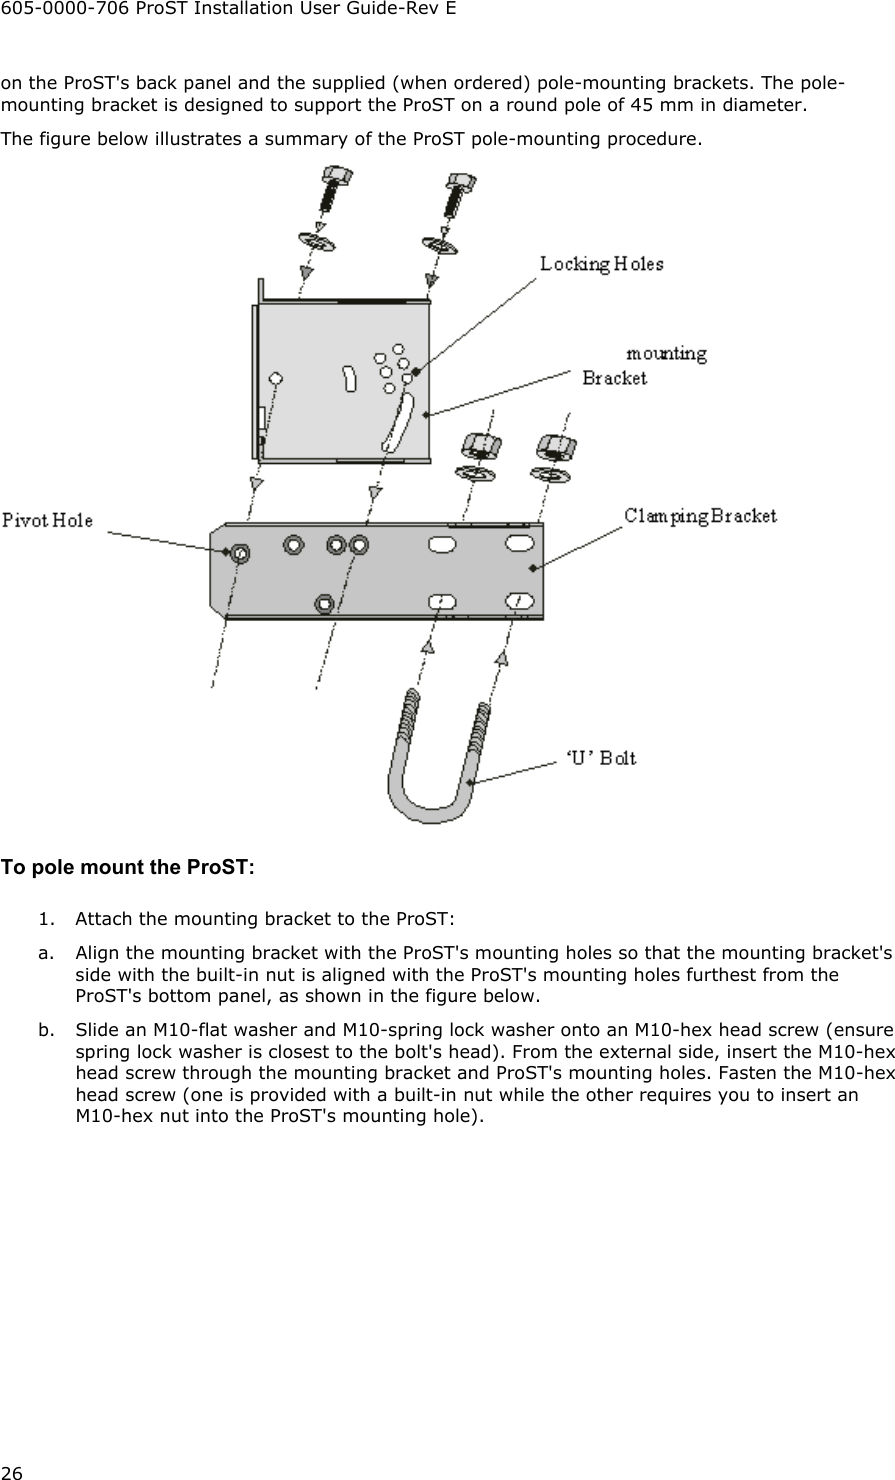 605-0000-706 ProST Installation User Guide-Rev E 26 on the ProST&apos;s back panel and the supplied (when ordered) pole-mounting brackets. The pole-mounting bracket is designed to support the ProST on a round pole of 45 mm in diameter. The figure below illustrates a summary of the ProST pole-mounting procedure.   To pole mount the ProST: 1.  Attach the mounting bracket to the ProST: a.  Align the mounting bracket with the ProST&apos;s mounting holes so that the mounting bracket&apos;s side with the built-in nut is aligned with the ProST&apos;s mounting holes furthest from the ProST&apos;s bottom panel, as shown in the figure below. b.  Slide an M10-flat washer and M10-spring lock washer onto an M10-hex head screw (ensure spring lock washer is closest to the bolt&apos;s head). From the external side, insert the M10-hex head screw through the mounting bracket and ProST&apos;s mounting holes. Fasten the M10-hex head screw (one is provided with a built-in nut while the other requires you to insert an M10-hex nut into the ProST&apos;s mounting hole). 